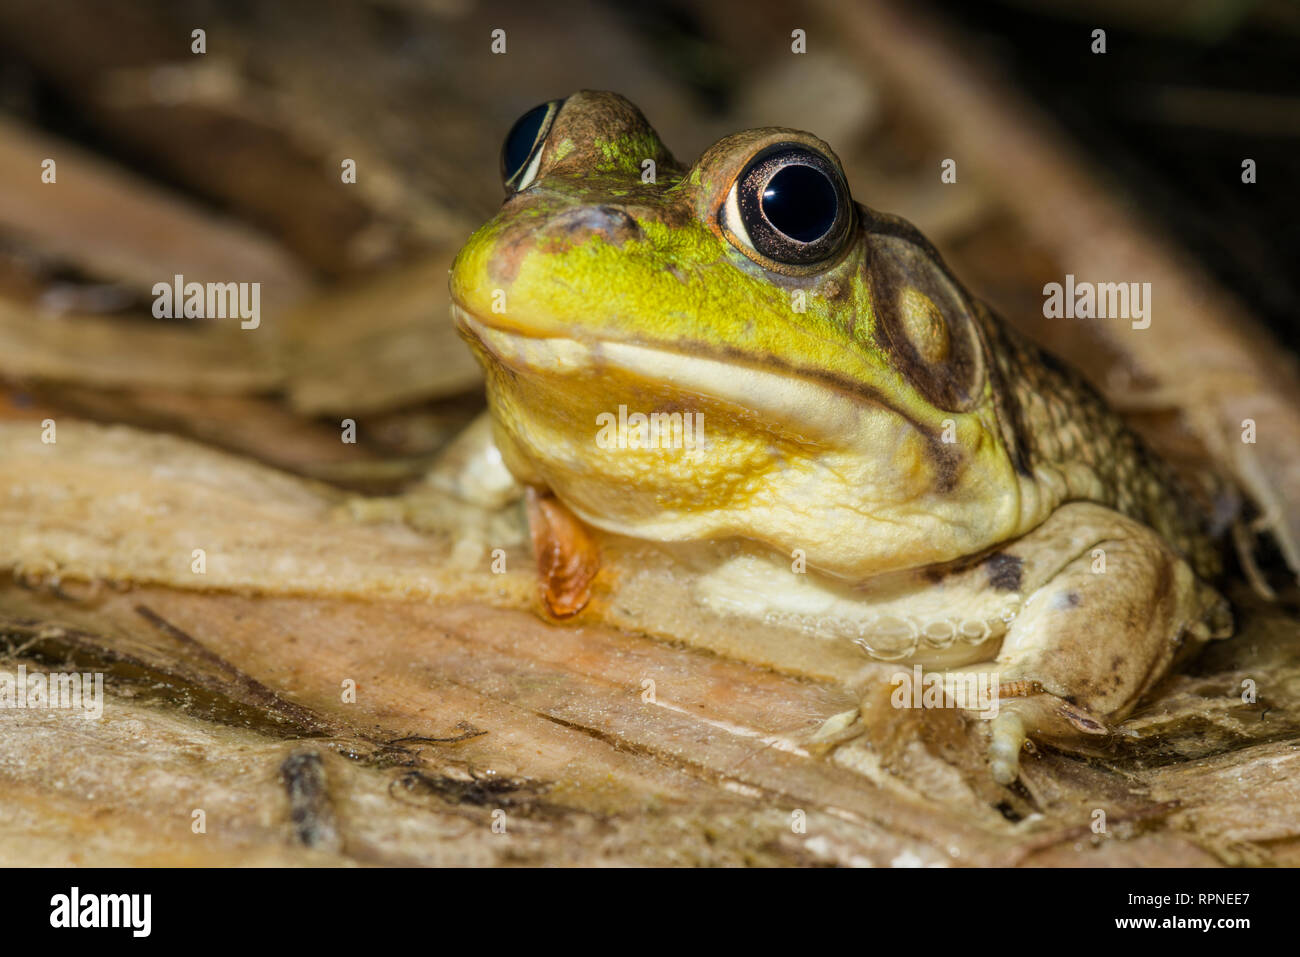 zoology / animals, amphibian (amphibia), Green Frog (Rana clamitans) in wetland at night near Thornton, Additional-Rights-Clearance-Info-Not-Available Stock Photo